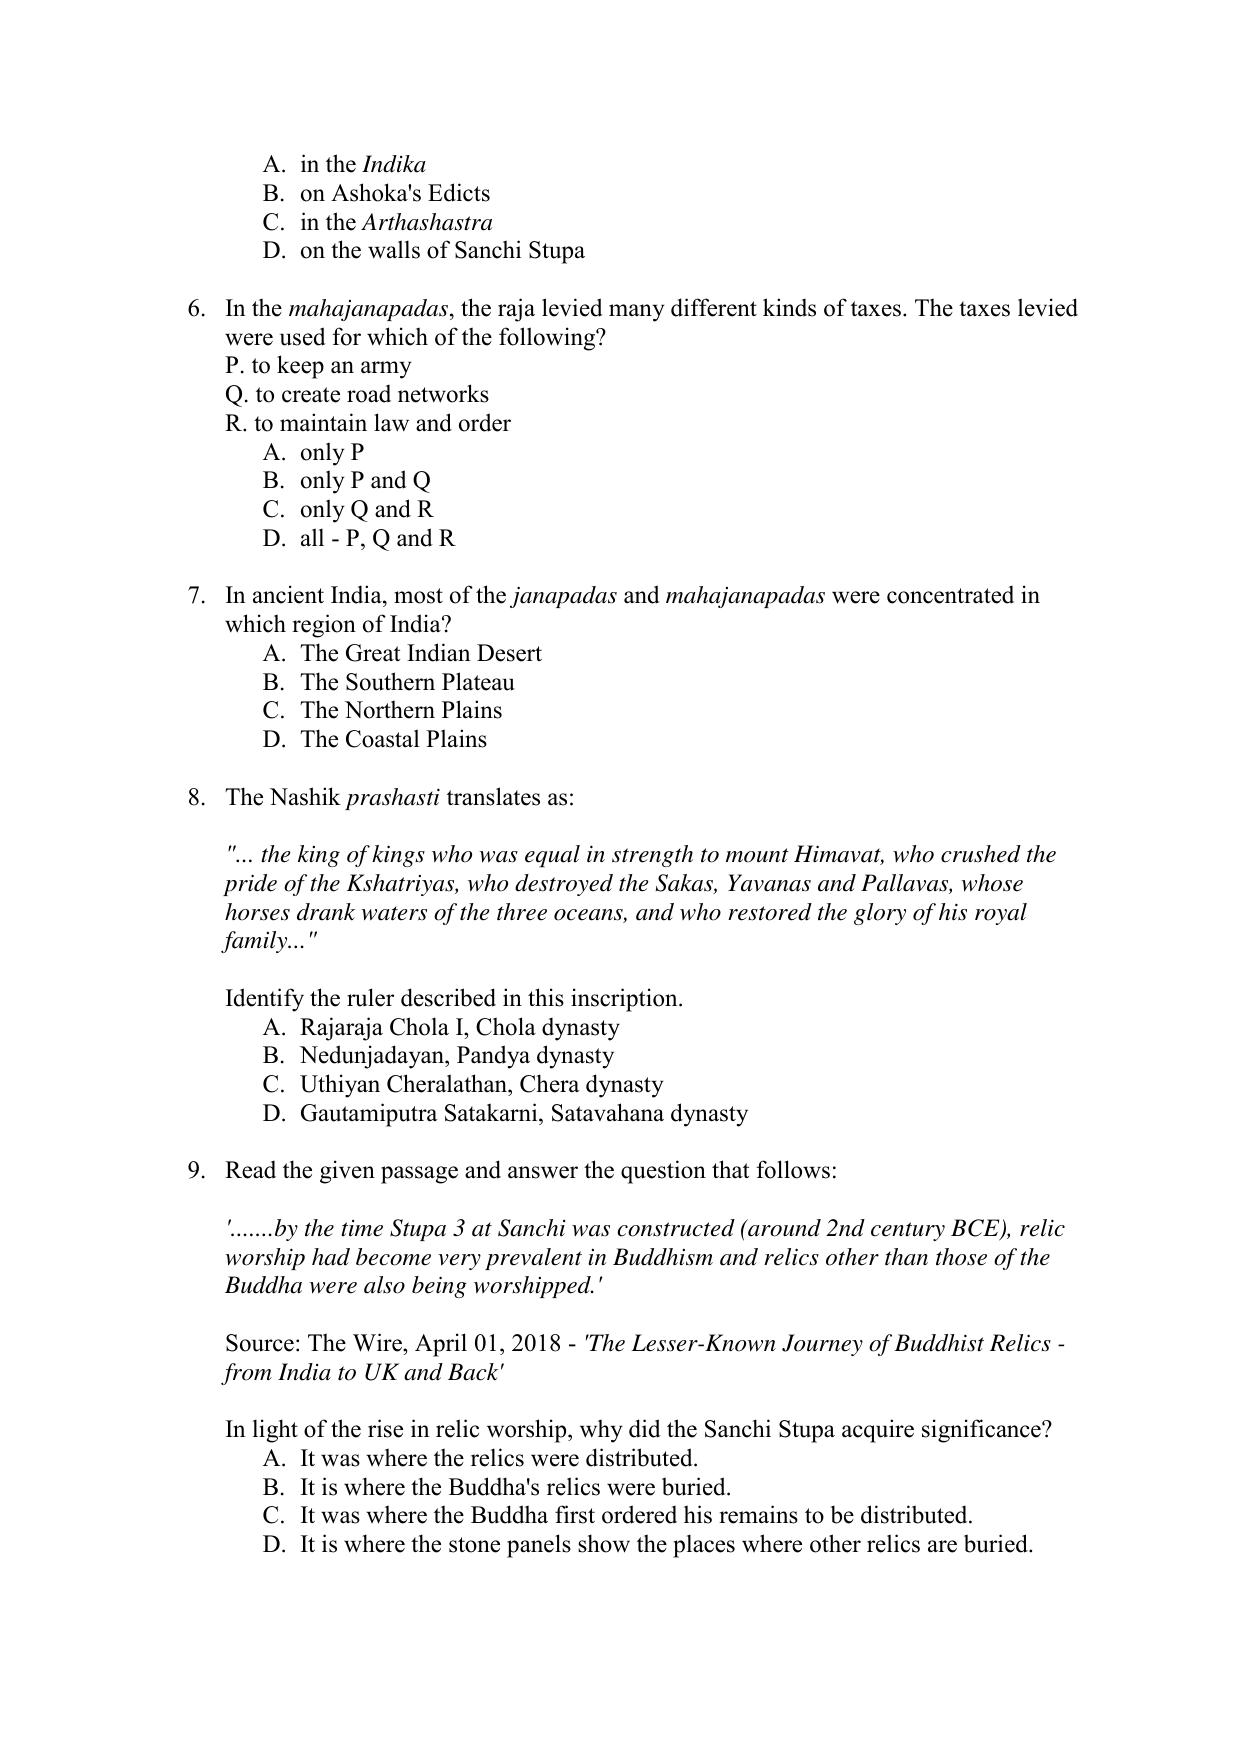 CBSE Class 12 History Term 1 Practice Questions 2021-22 - Page 2